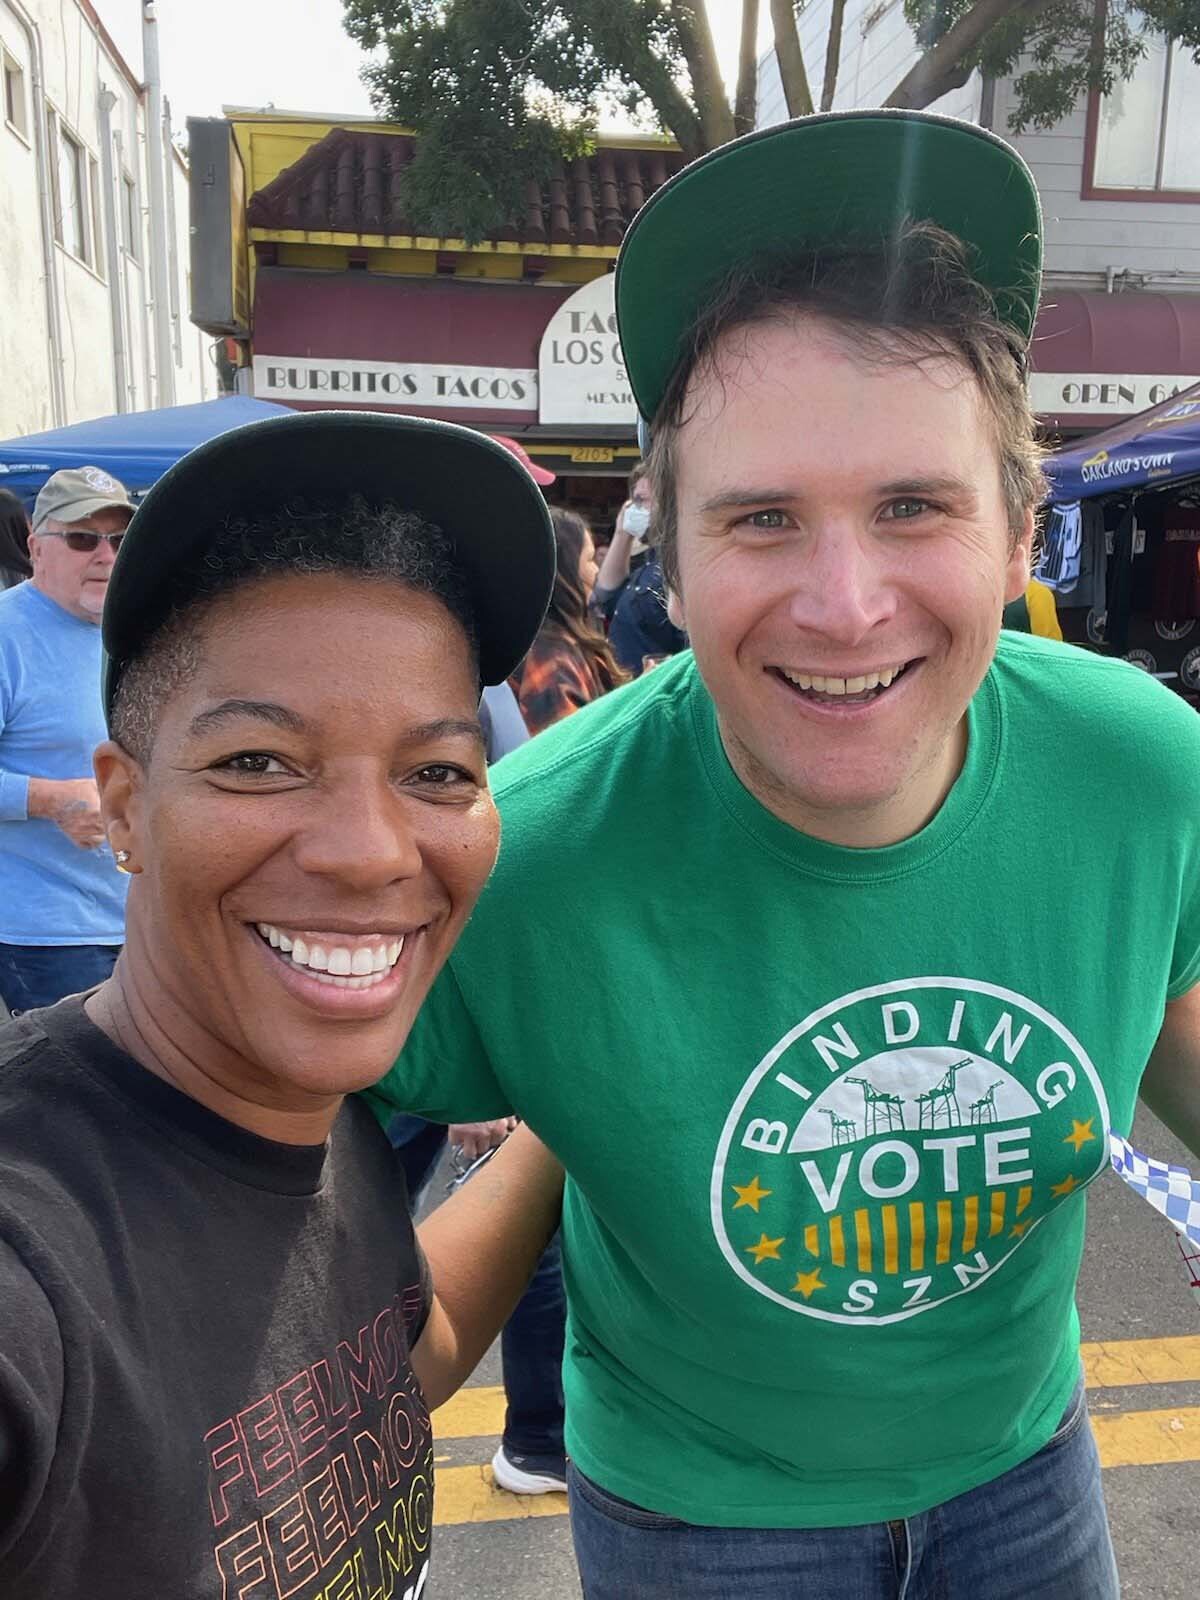 Man in a green "Binding Vote Szn" t-shirt poses with a woman in a black baseball cap.